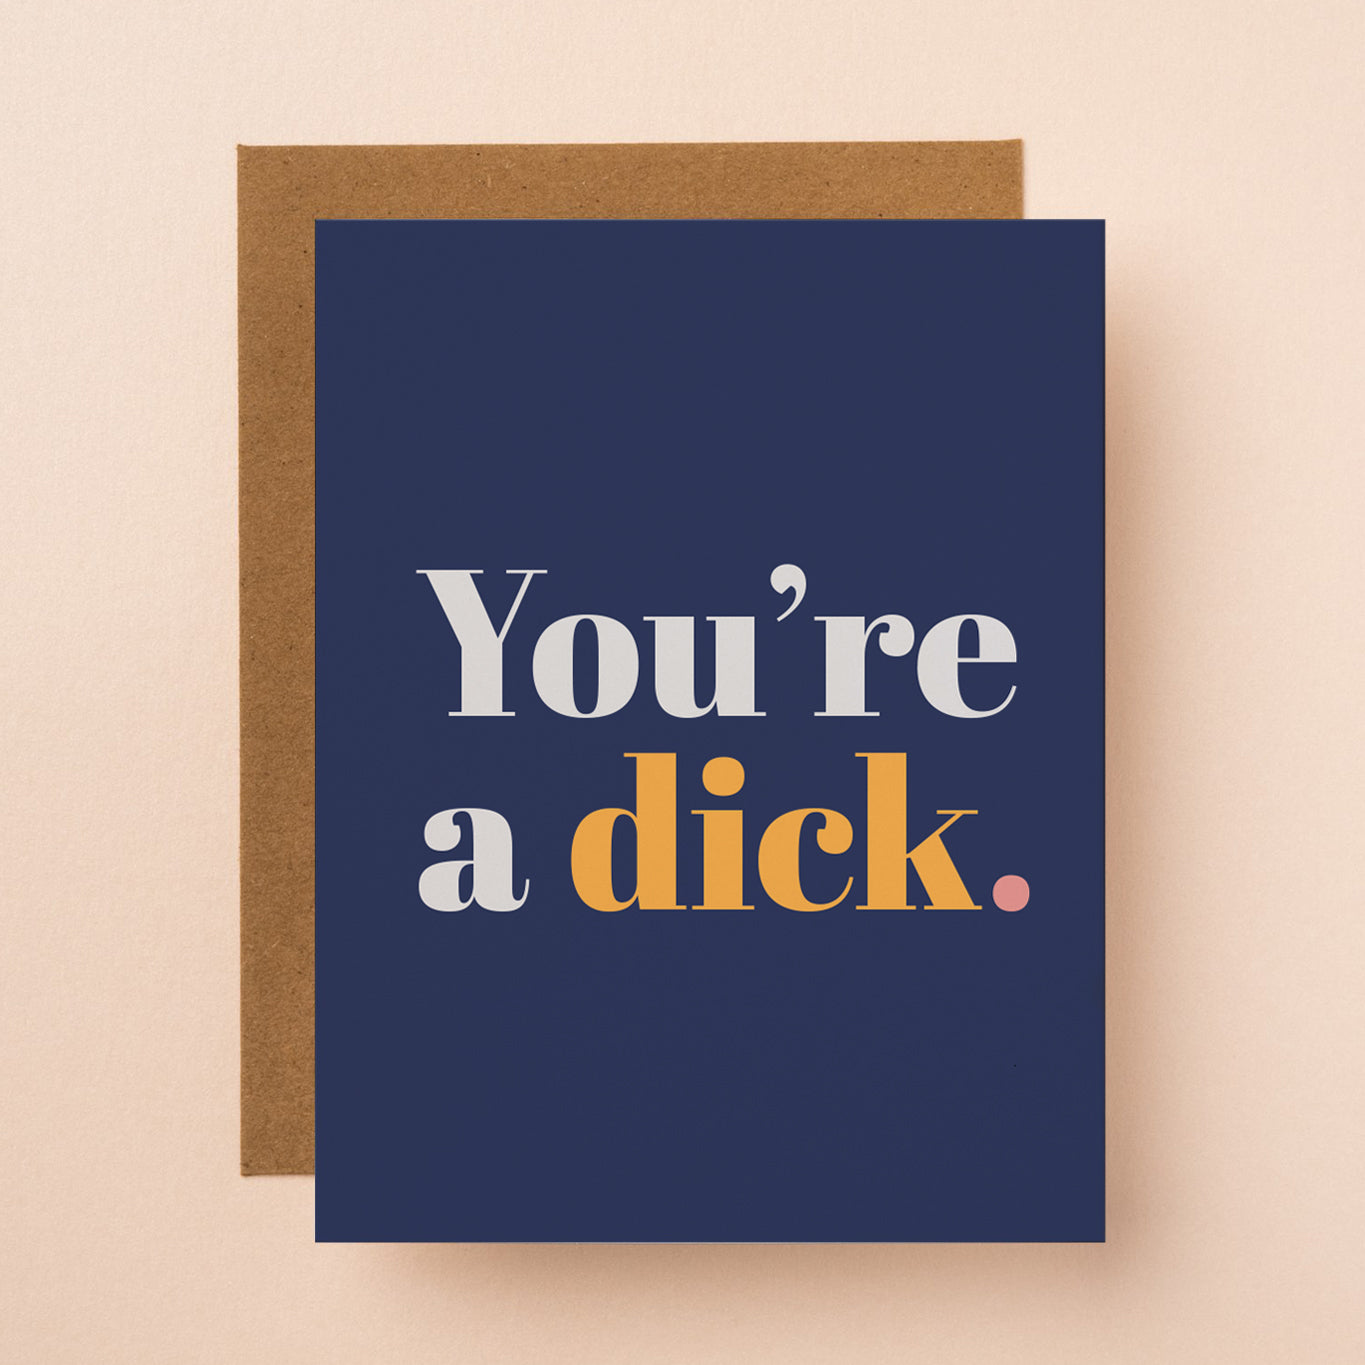 A sarcastic and dry friendship card that reads "You're a dick."